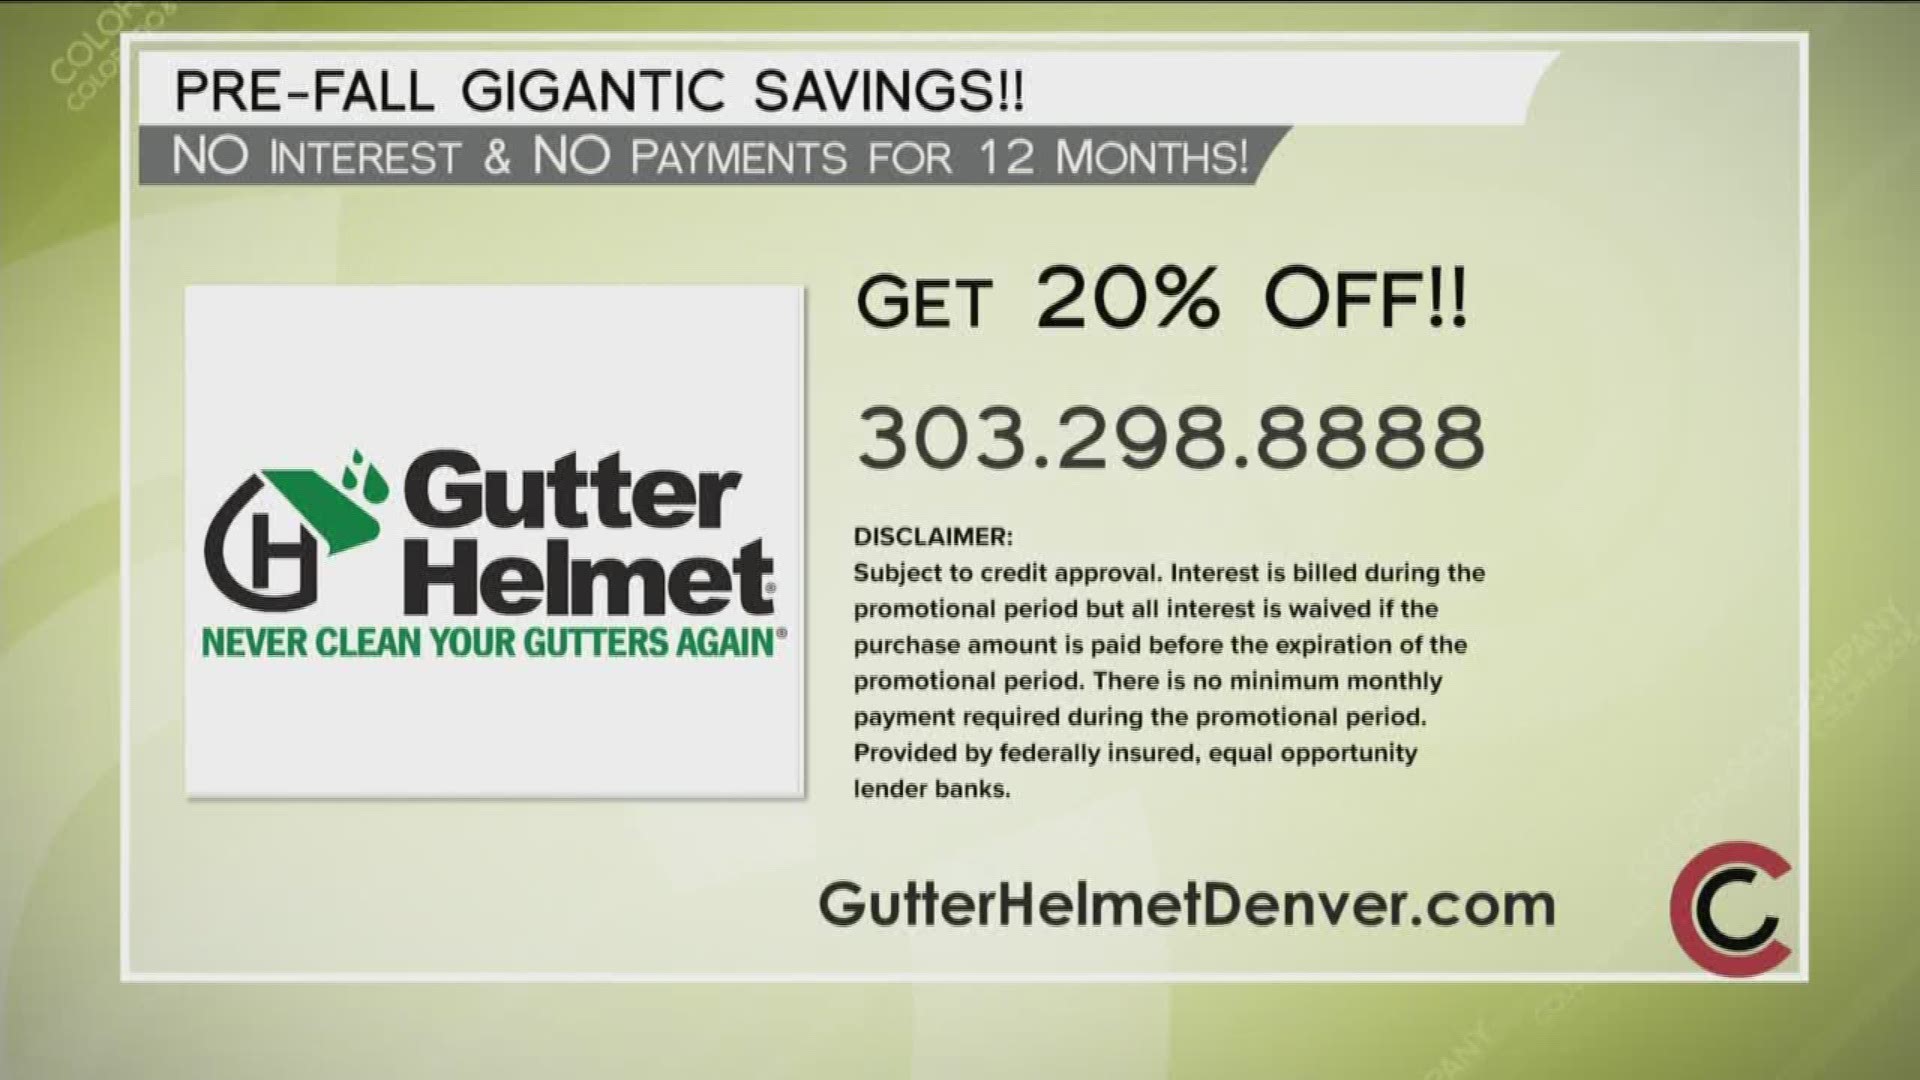 Never clean your gutters again! Gutter Helmet is offering CoCo viewers a great deal—20% off, no interest, and no payments for 12 months! Call 303.298.8888 or visit www.GutterHelmetDenver.com for more information. 
THIS INTERVIEW HAS COMMERCIAL CONTENT. PRODUCTS AND SERVICES FEATURED APPEAR AS PAID ADVERTISING.